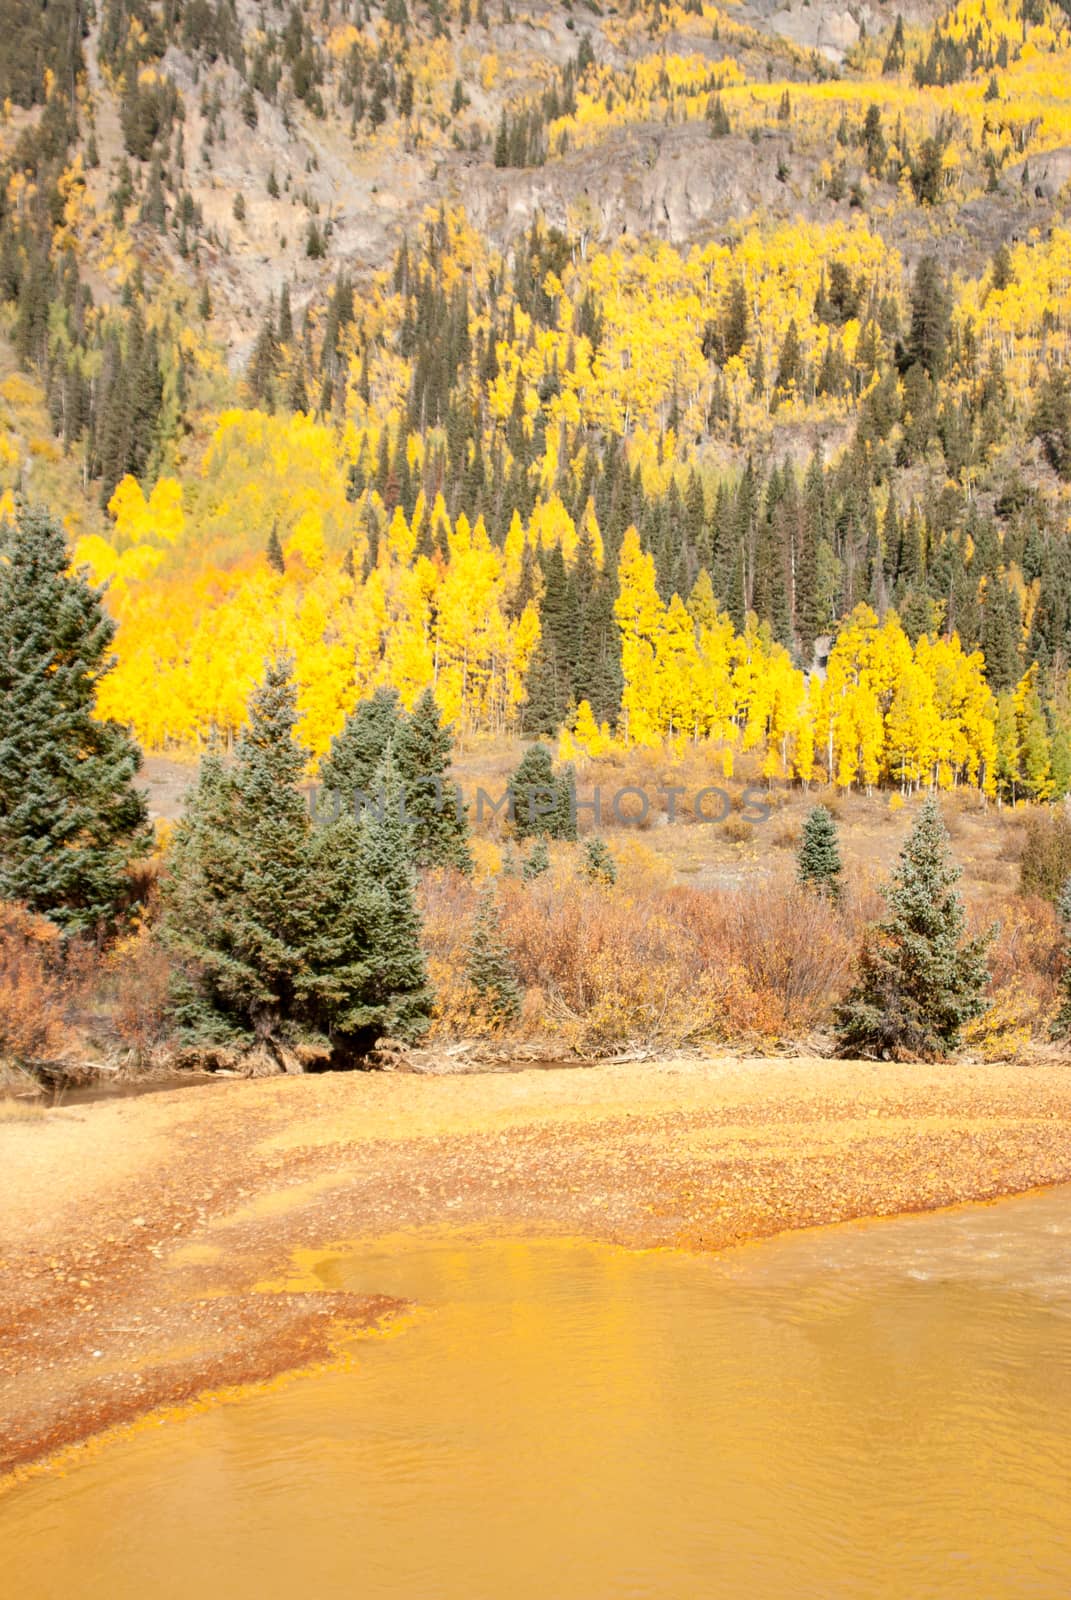 Aspens on mountainside by muddy yellow river